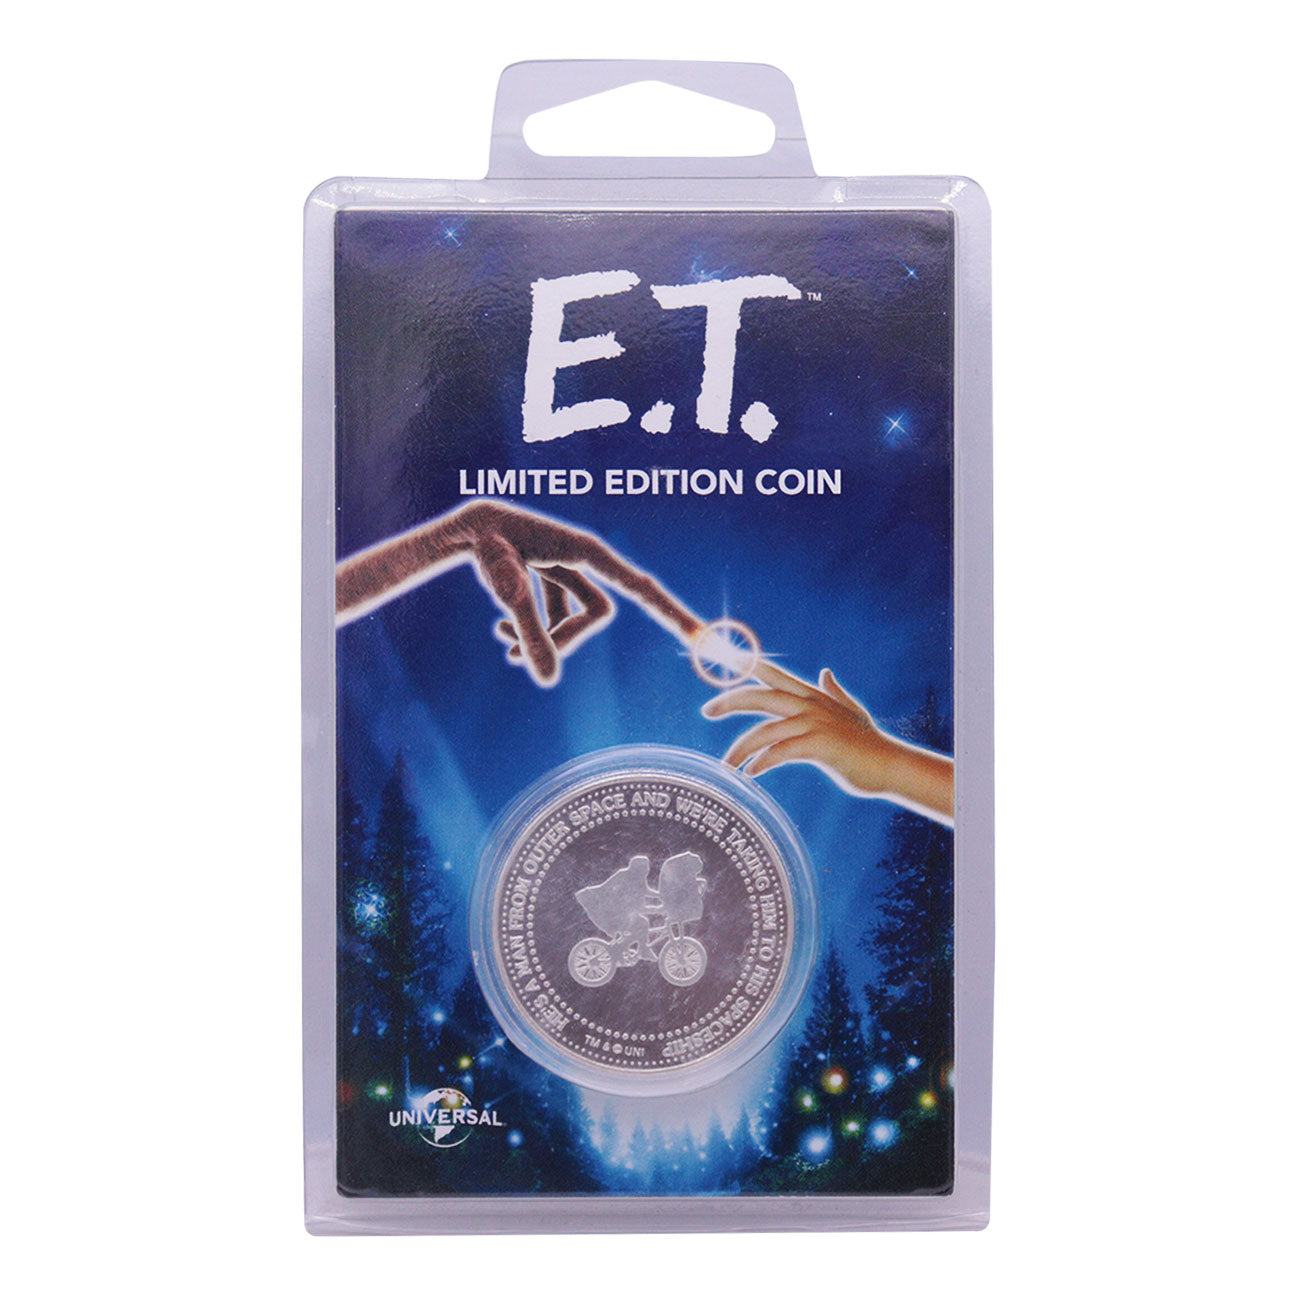 E.T. Limited Edition Collectible Coin